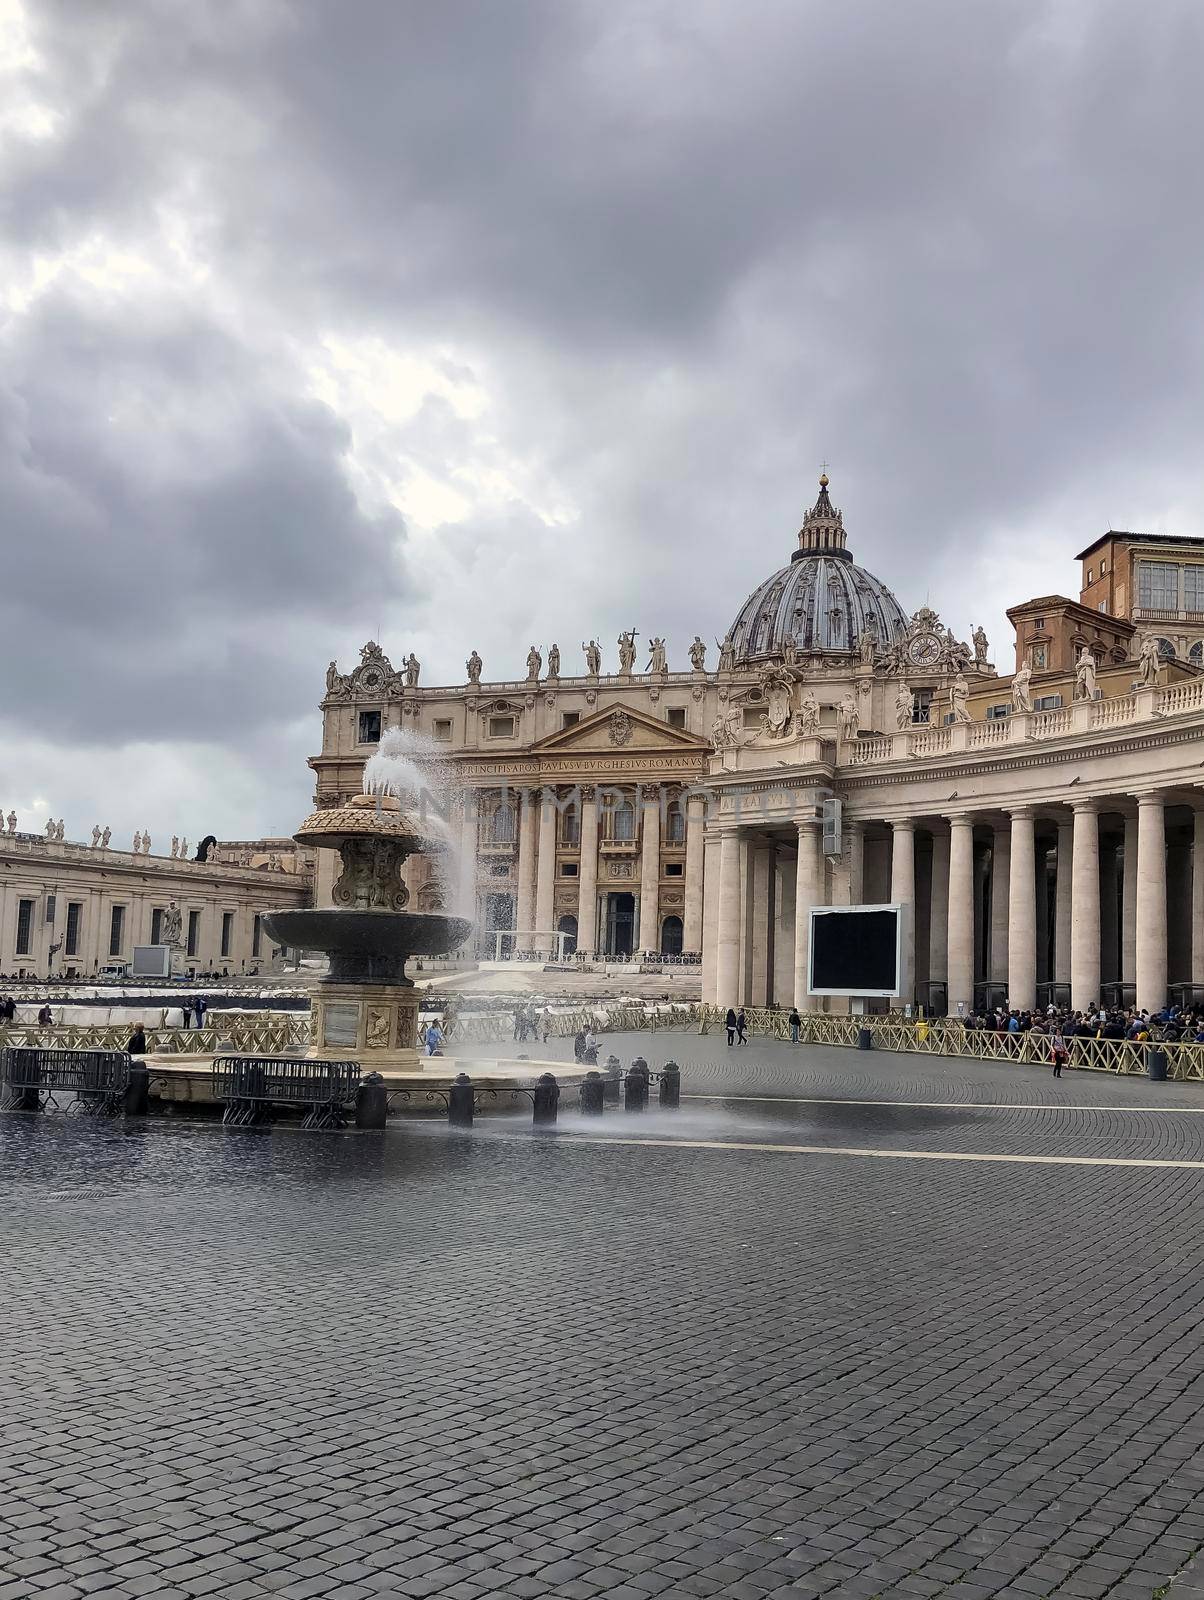 Saint Peter's Basilica and square in Vatican City, Rome, Italy. High quality photo